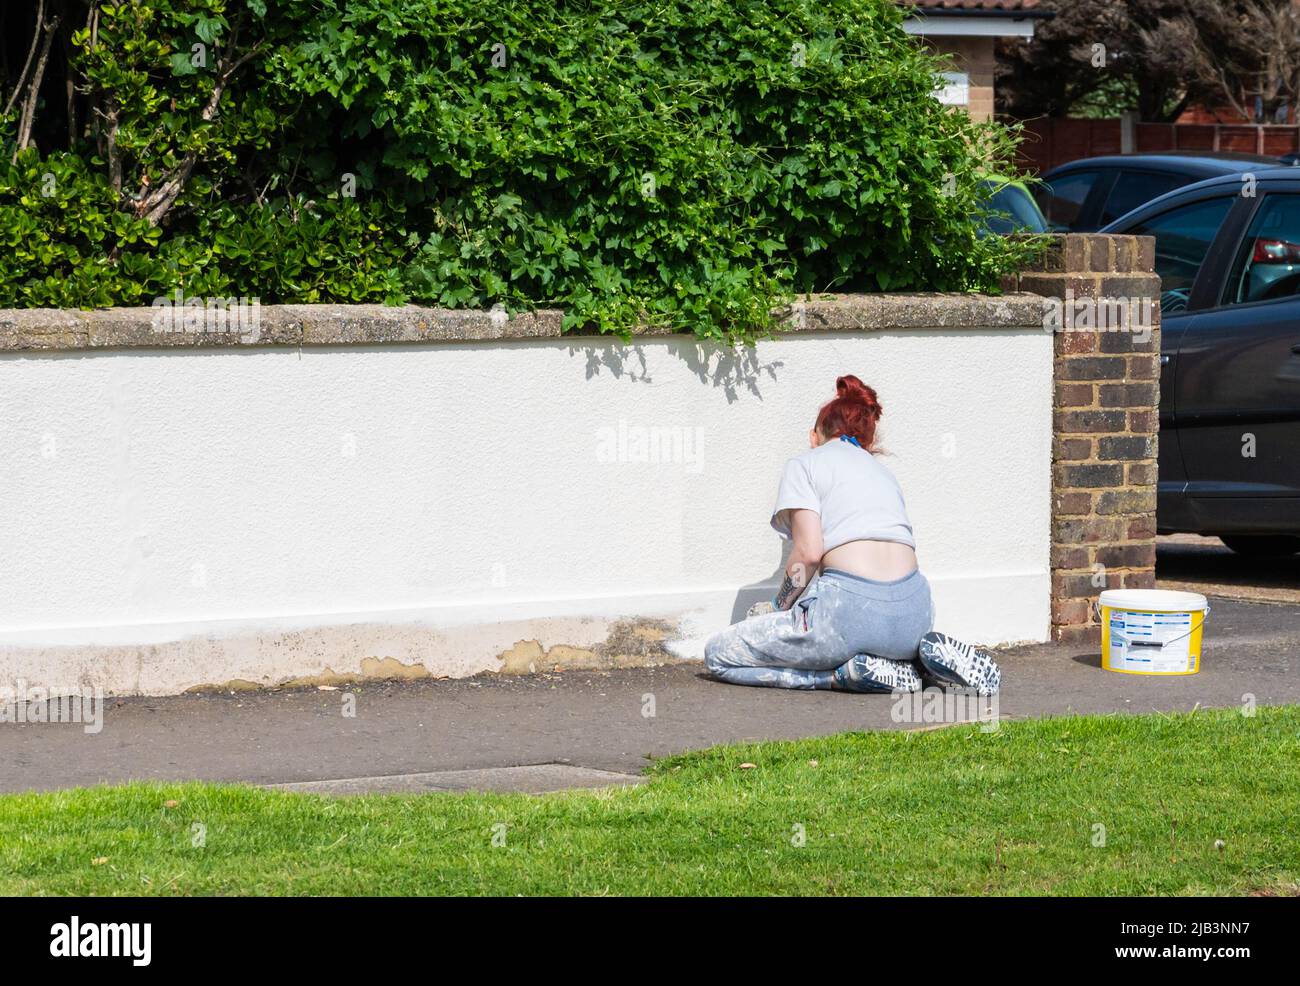 Women kneeling on the ground on a public pavement while painting a, exterior garden wall in white. Stock Photo